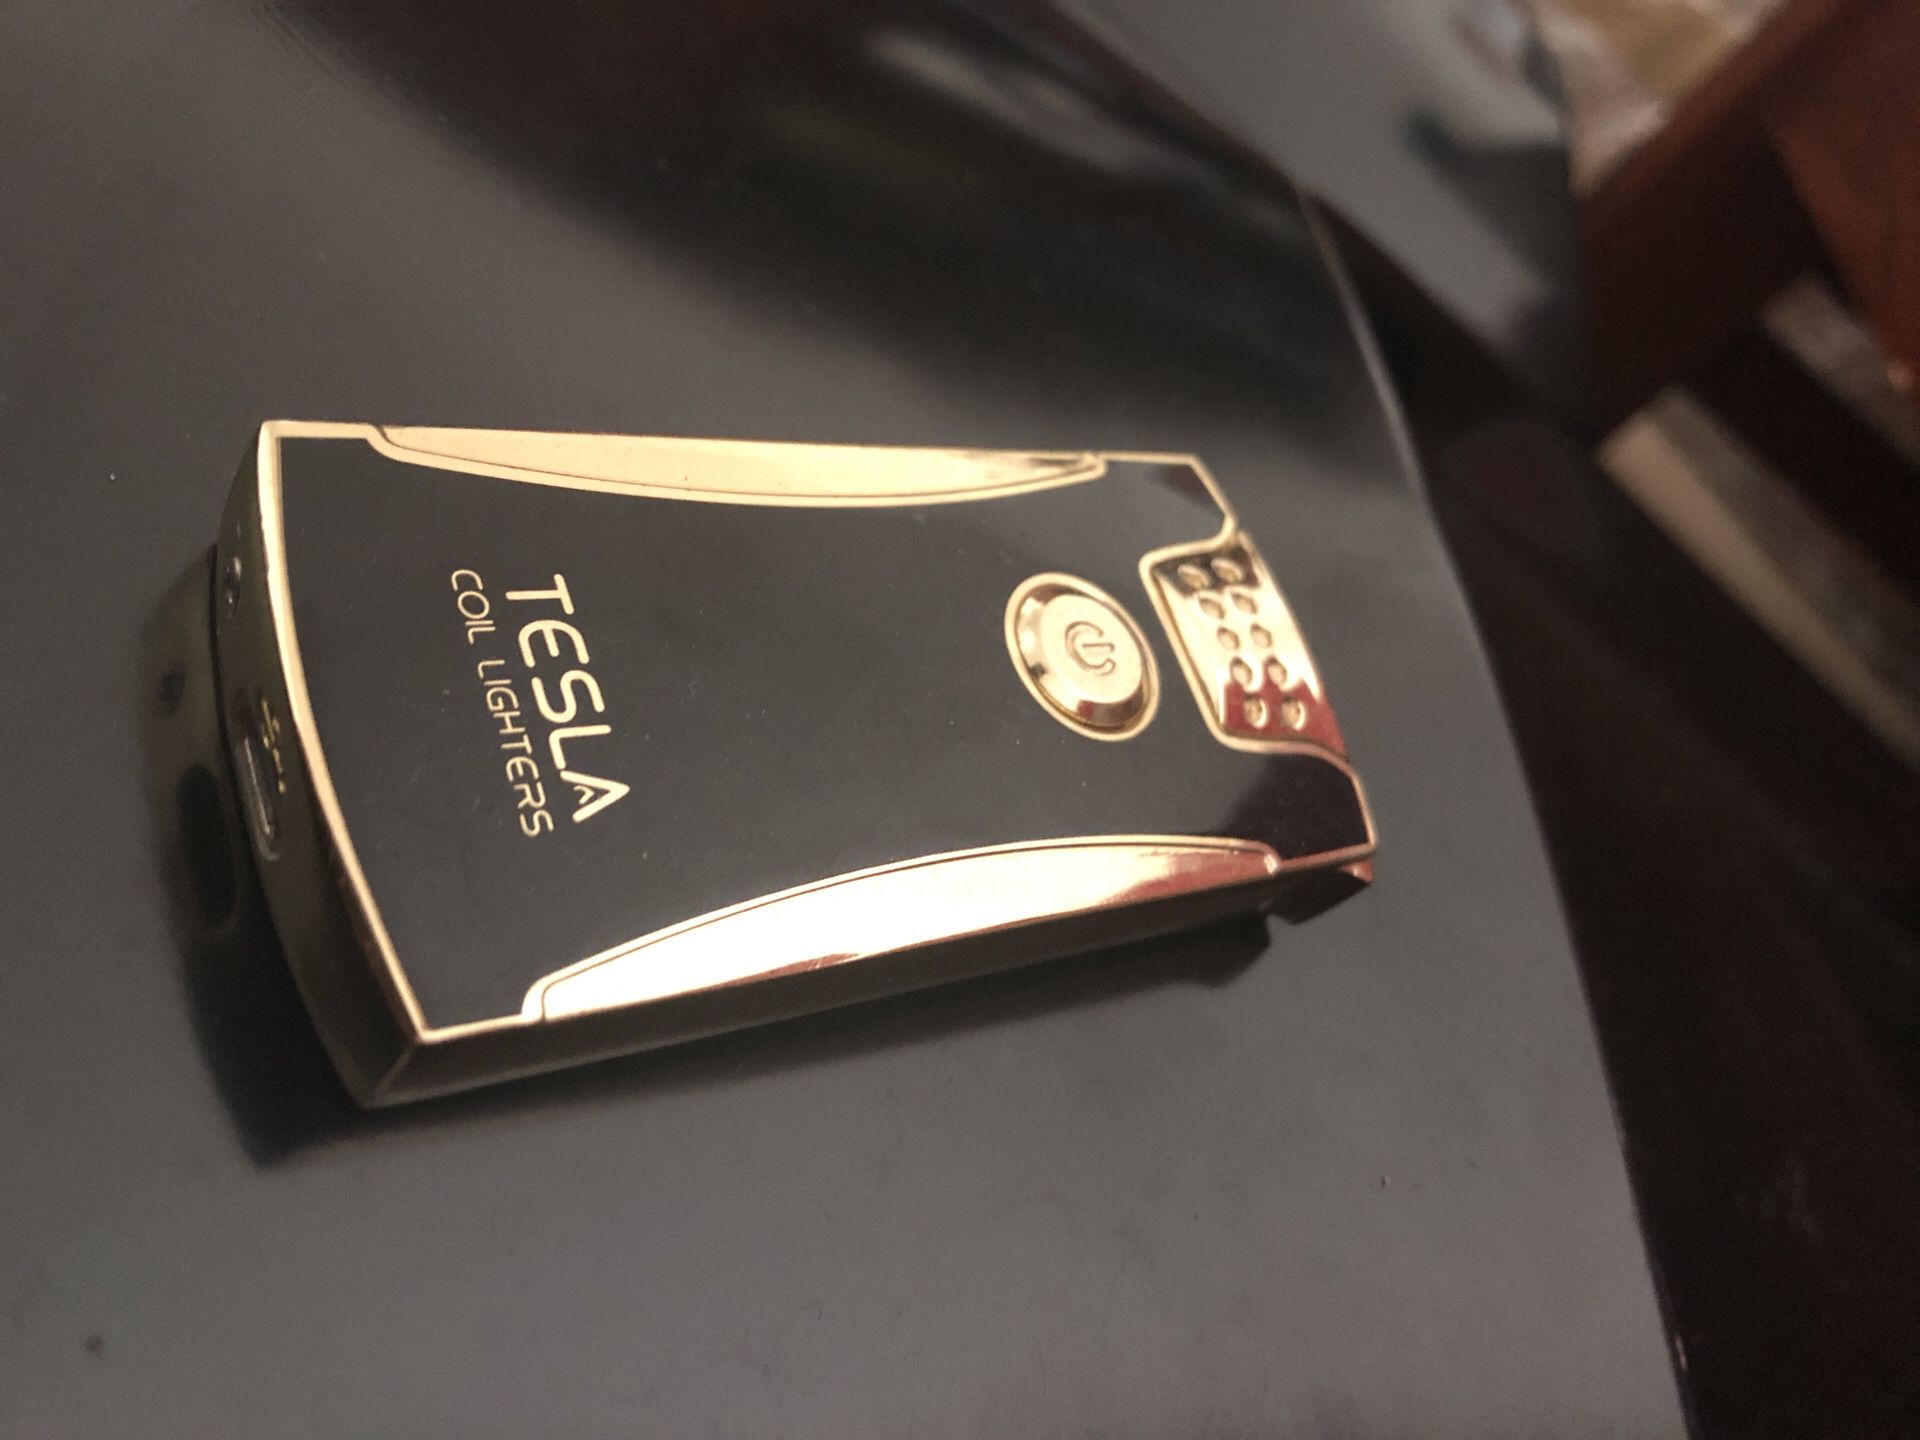 Tesla Lighter (Fully rechargeable & comes with charger)